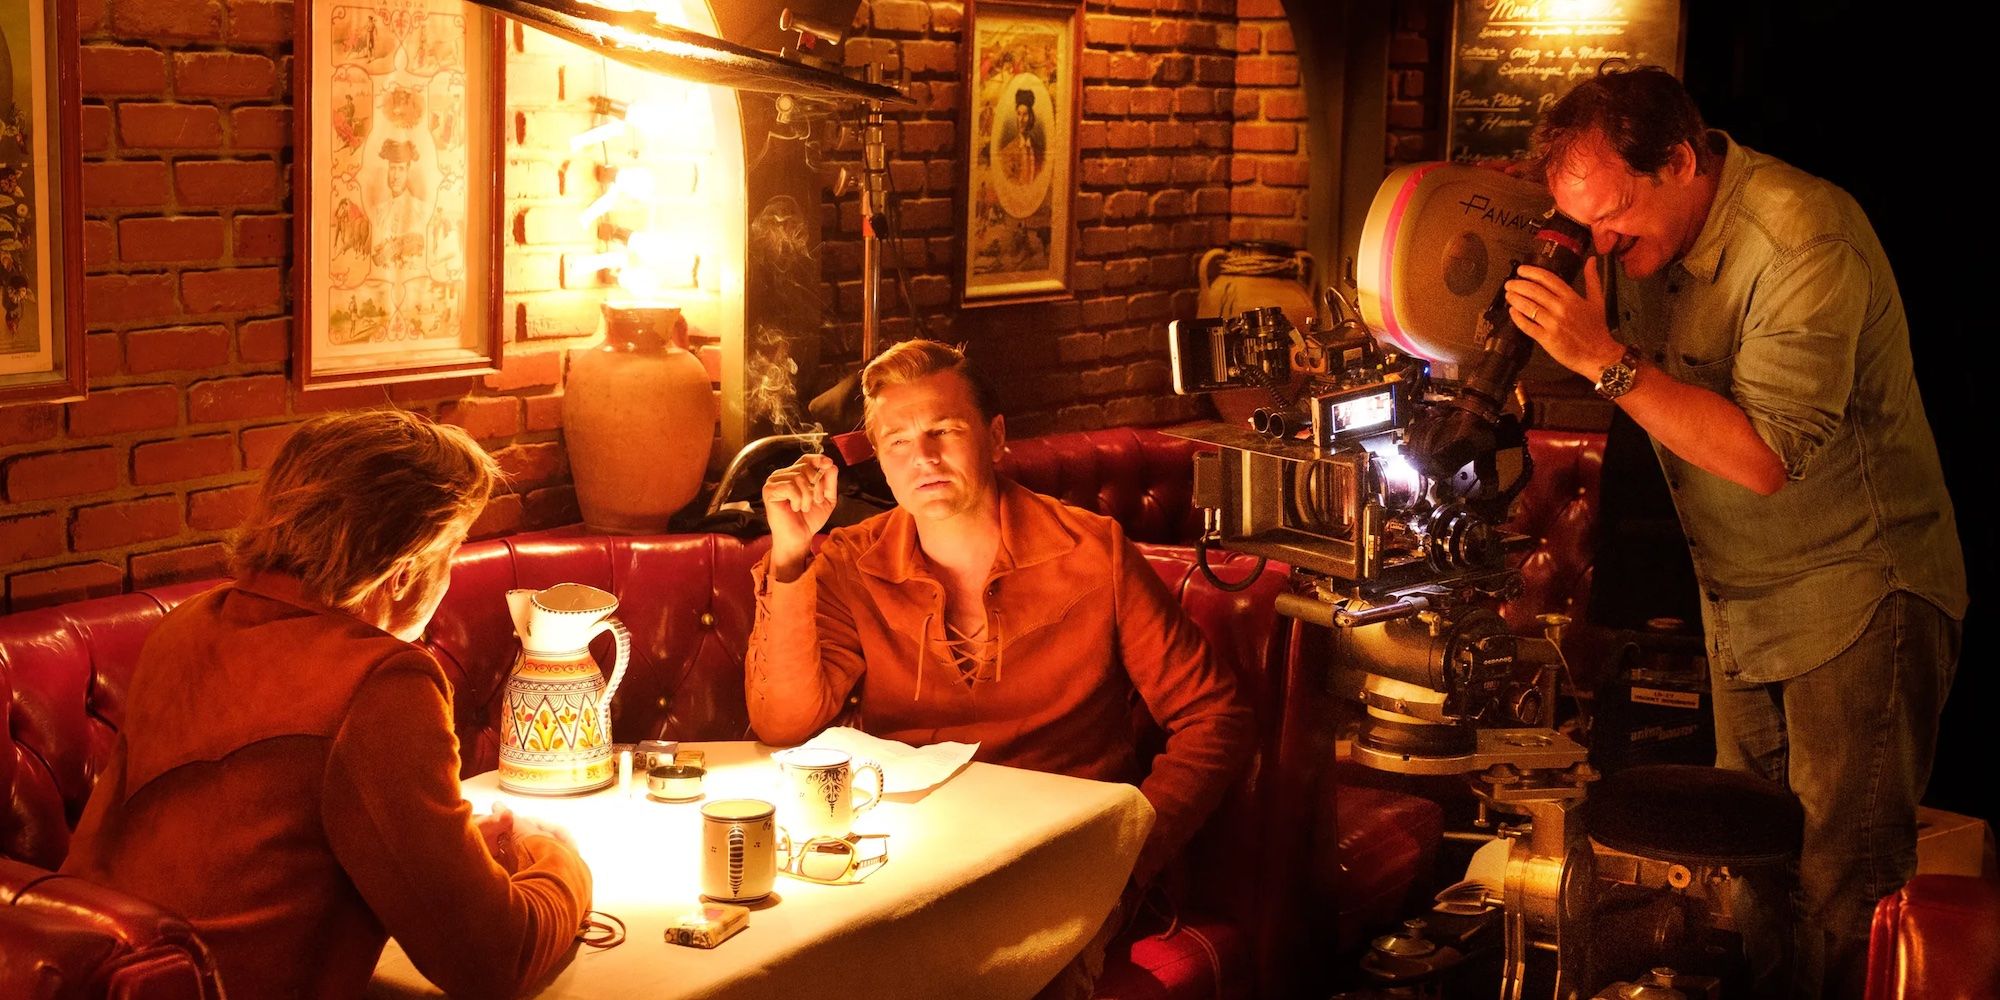 Quentin Tarantino filming Leonardo DiCaprio and Brad Pitt in Once Upon a Time in Hollywood